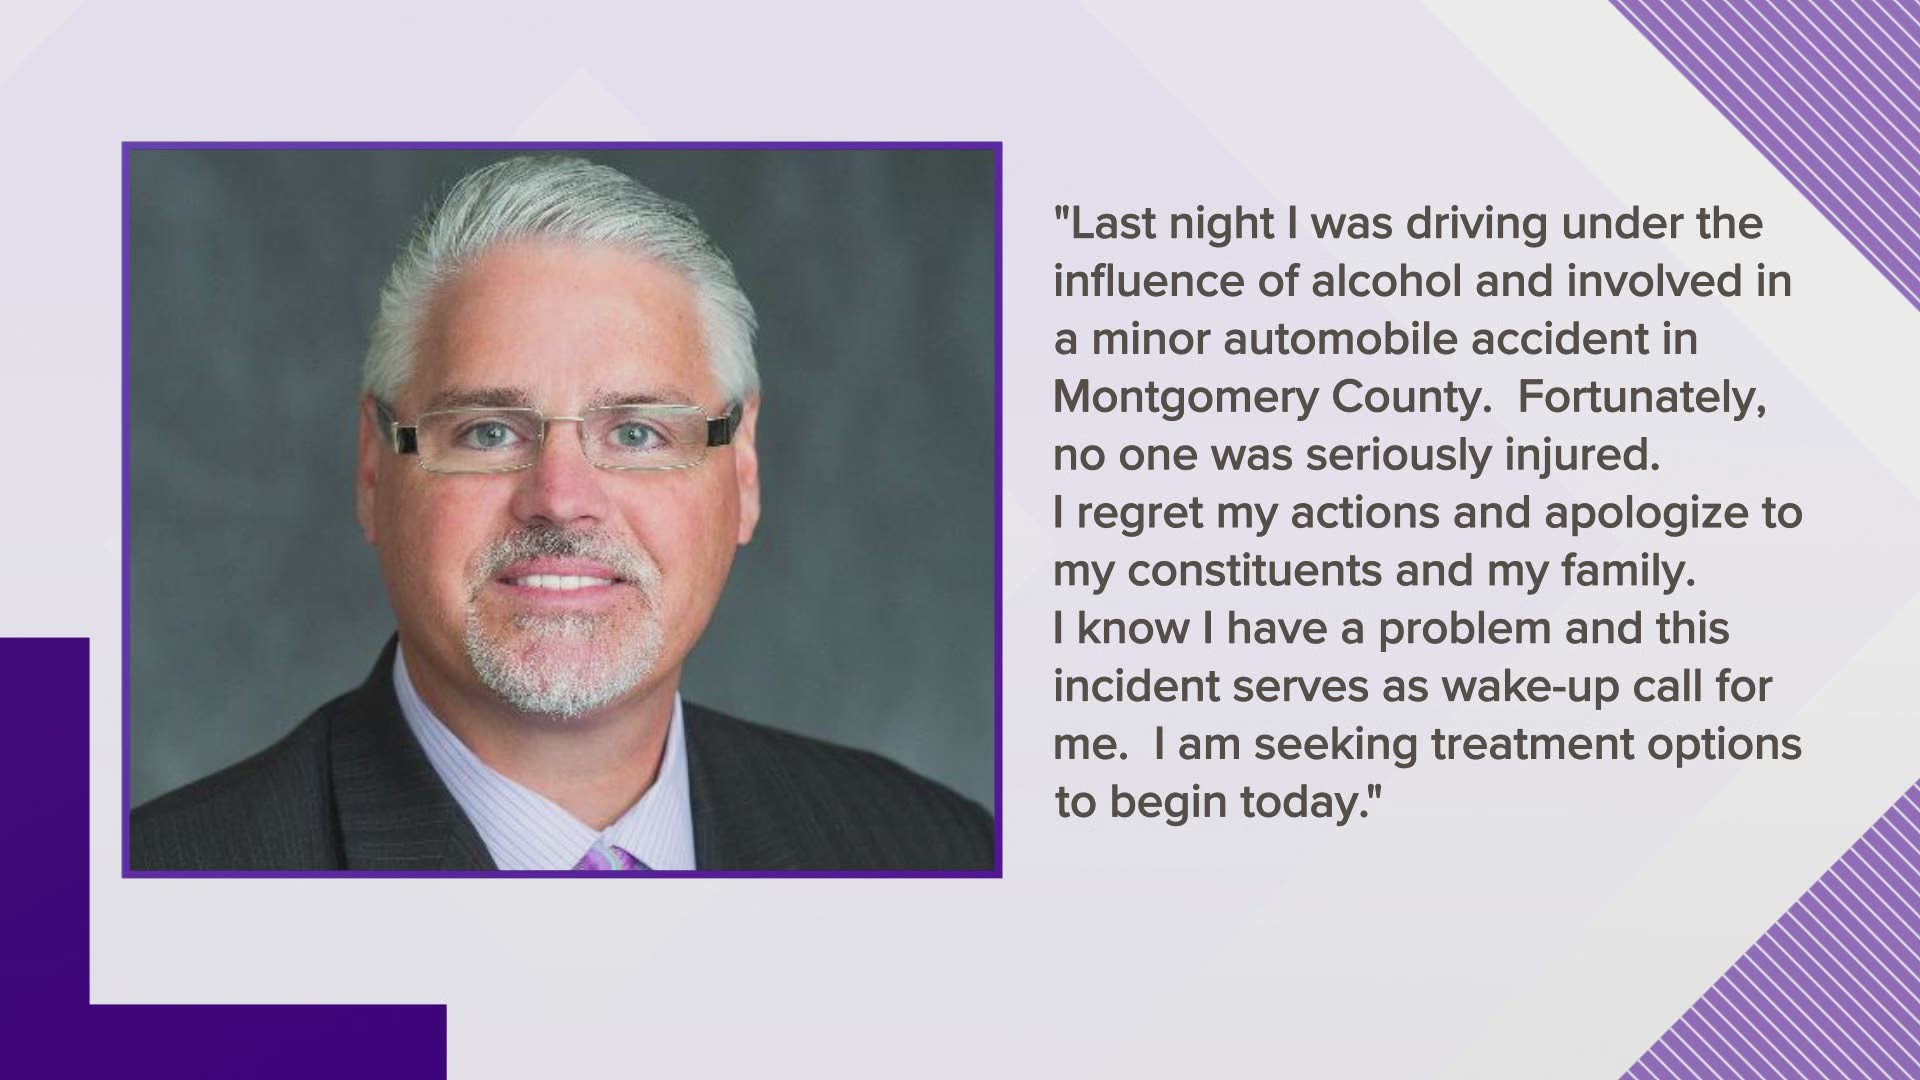 State Rep. Dan Huberty was arrested Friday night after driving while intoxicated and being involved in a crash, he confirmed on his Facebook page.